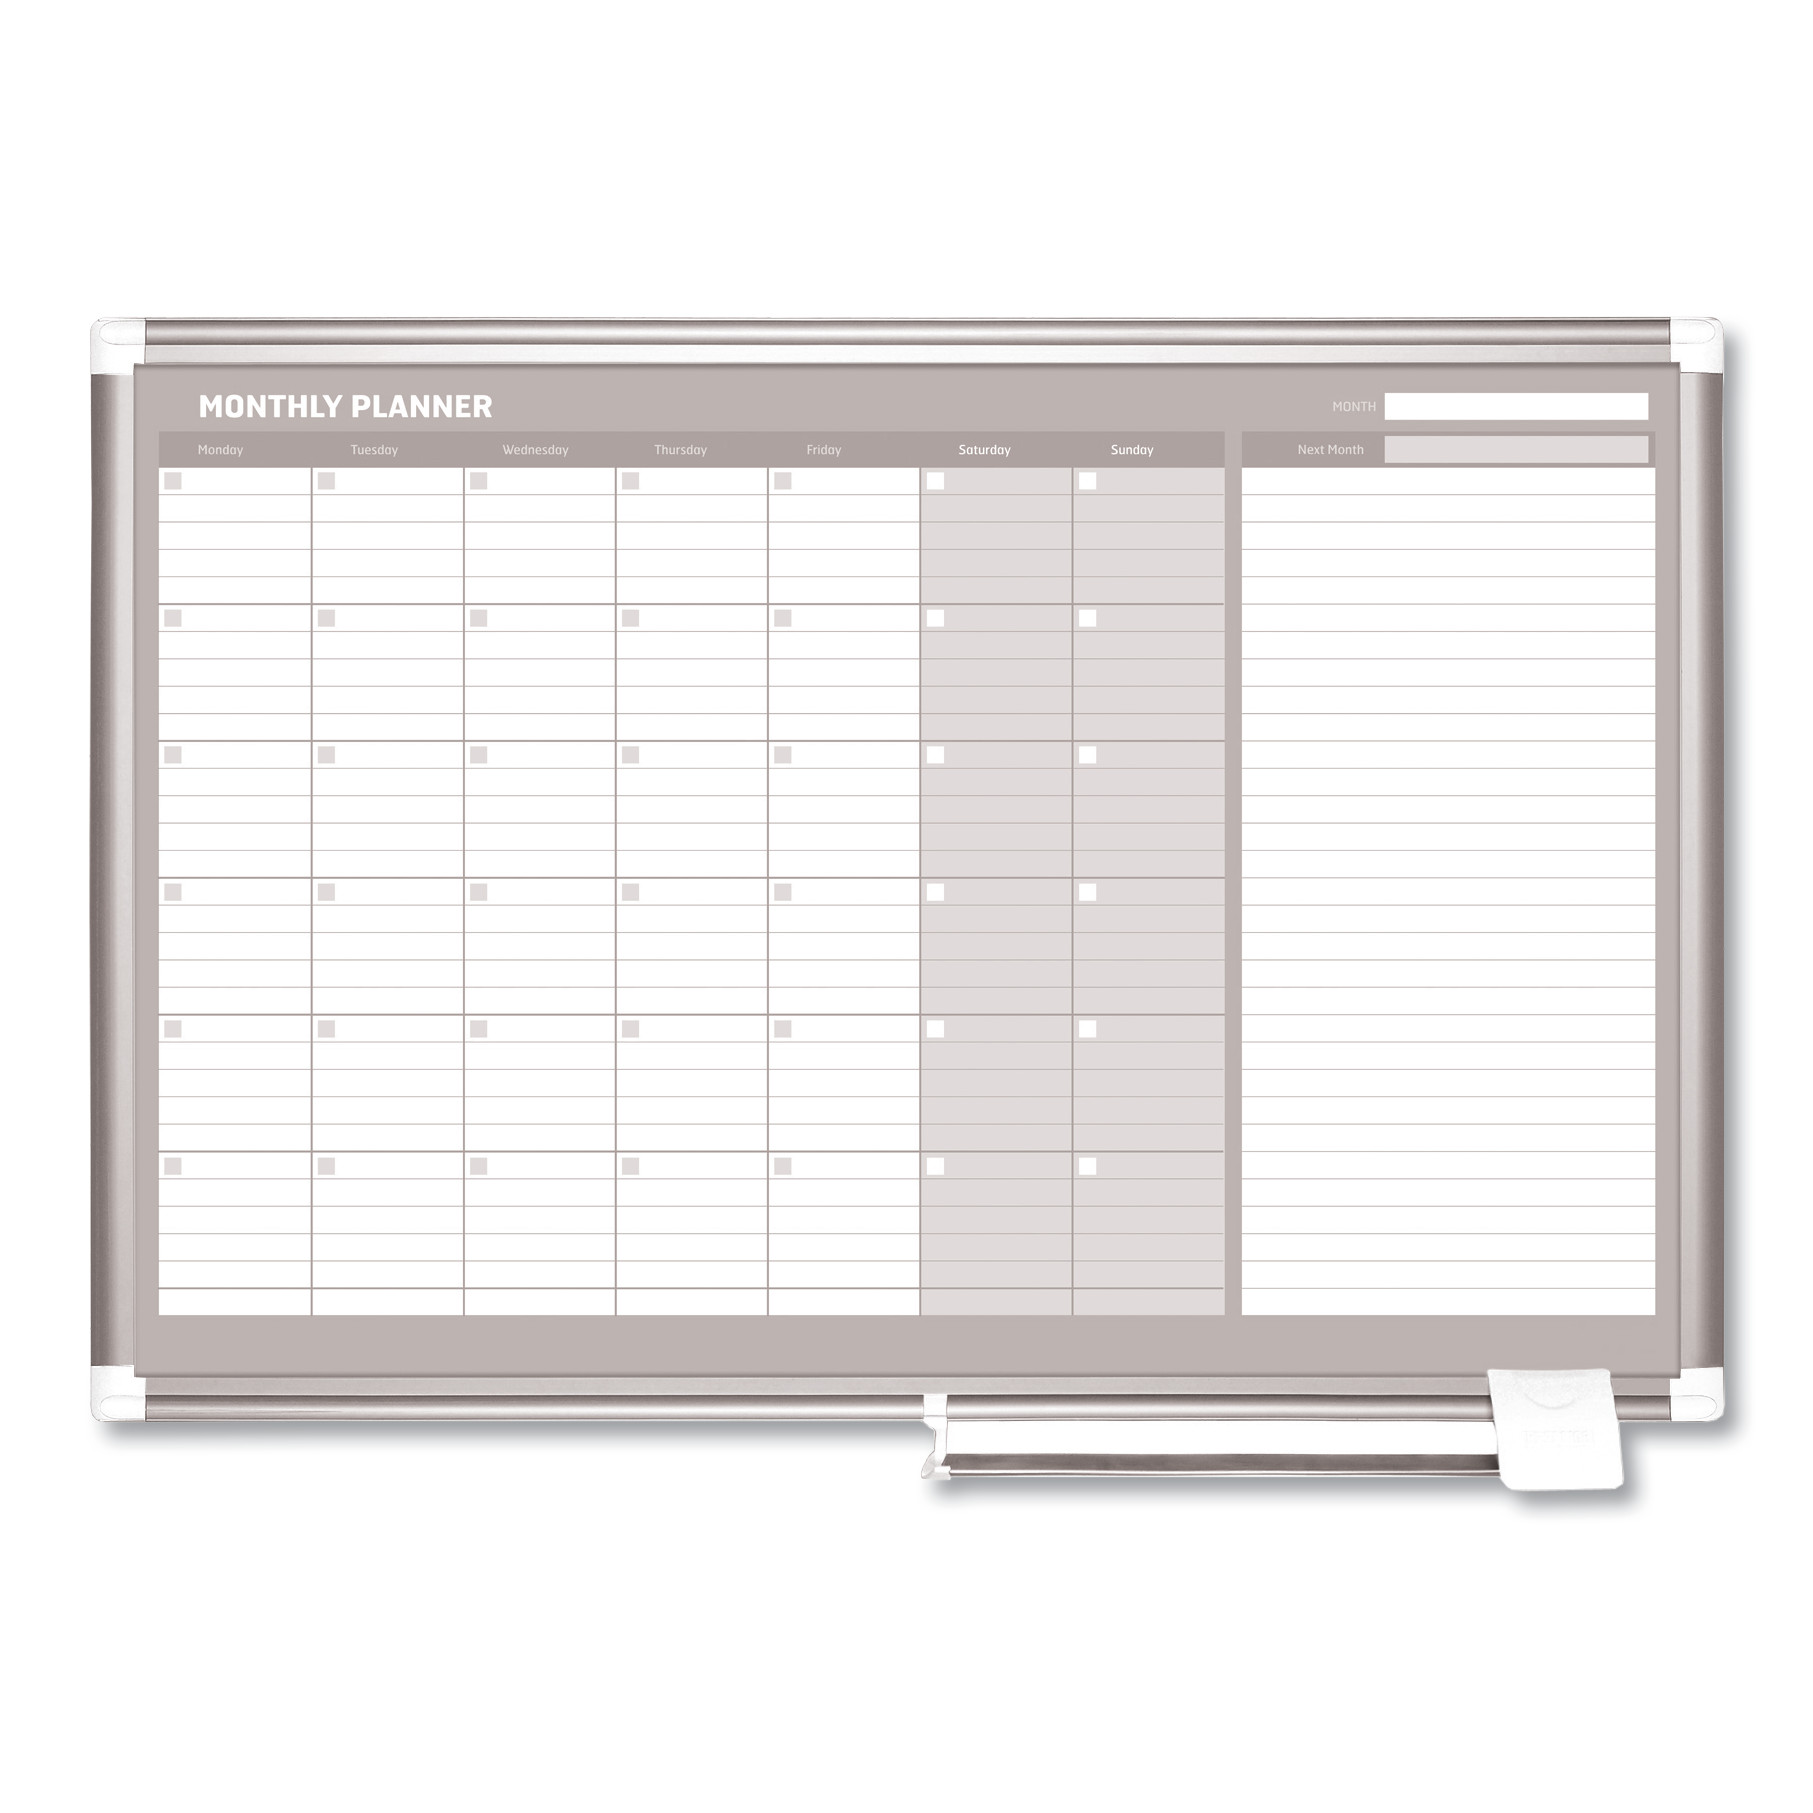  MasterVision GA0397830 Monthly Planner, 36x24, Silver Frame (BVCGA0397830) 